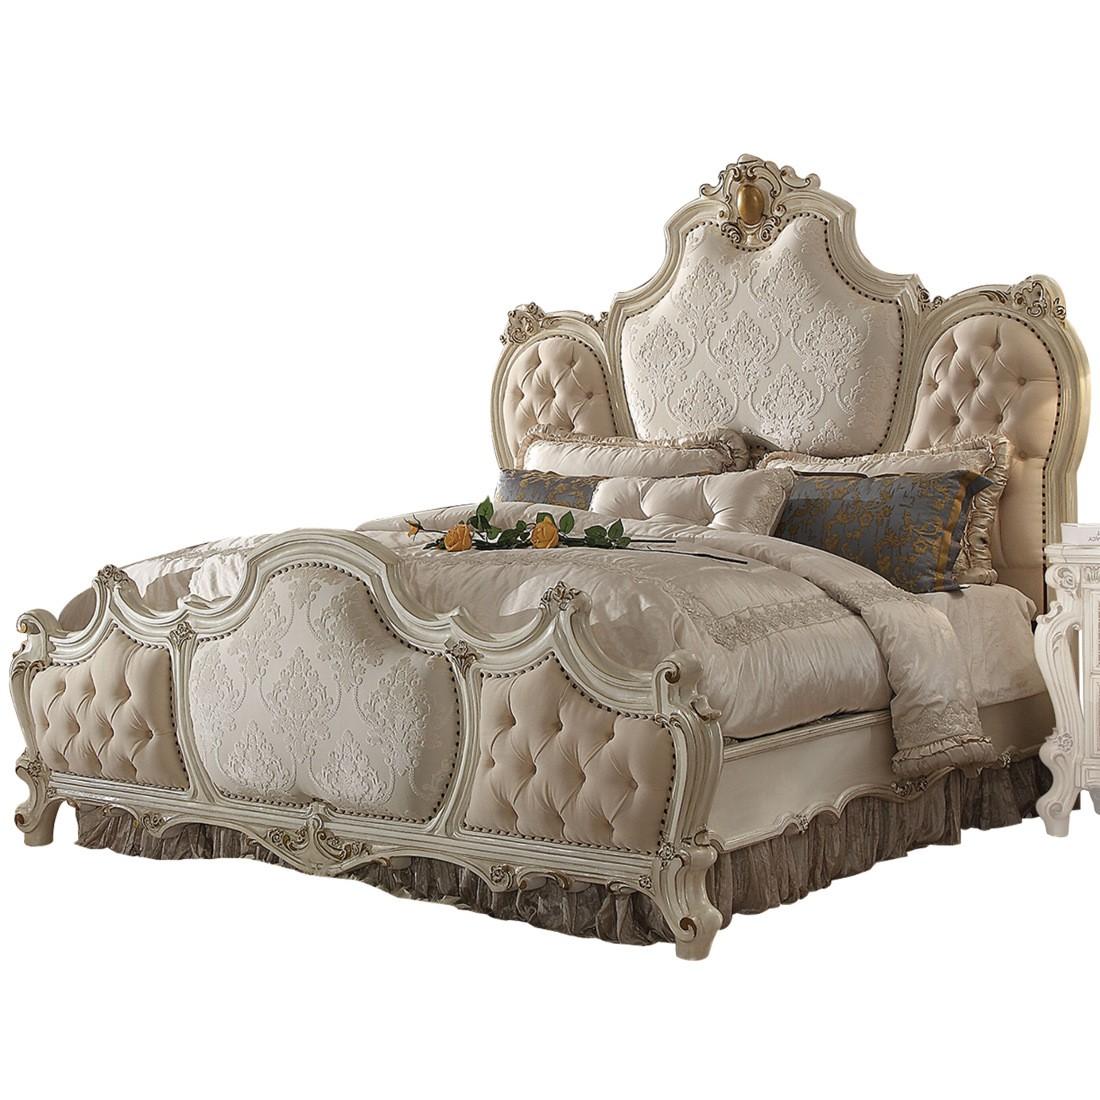 

    
Dili Tufted Antique Pearl Standard Queen Bed Vintage Classic
